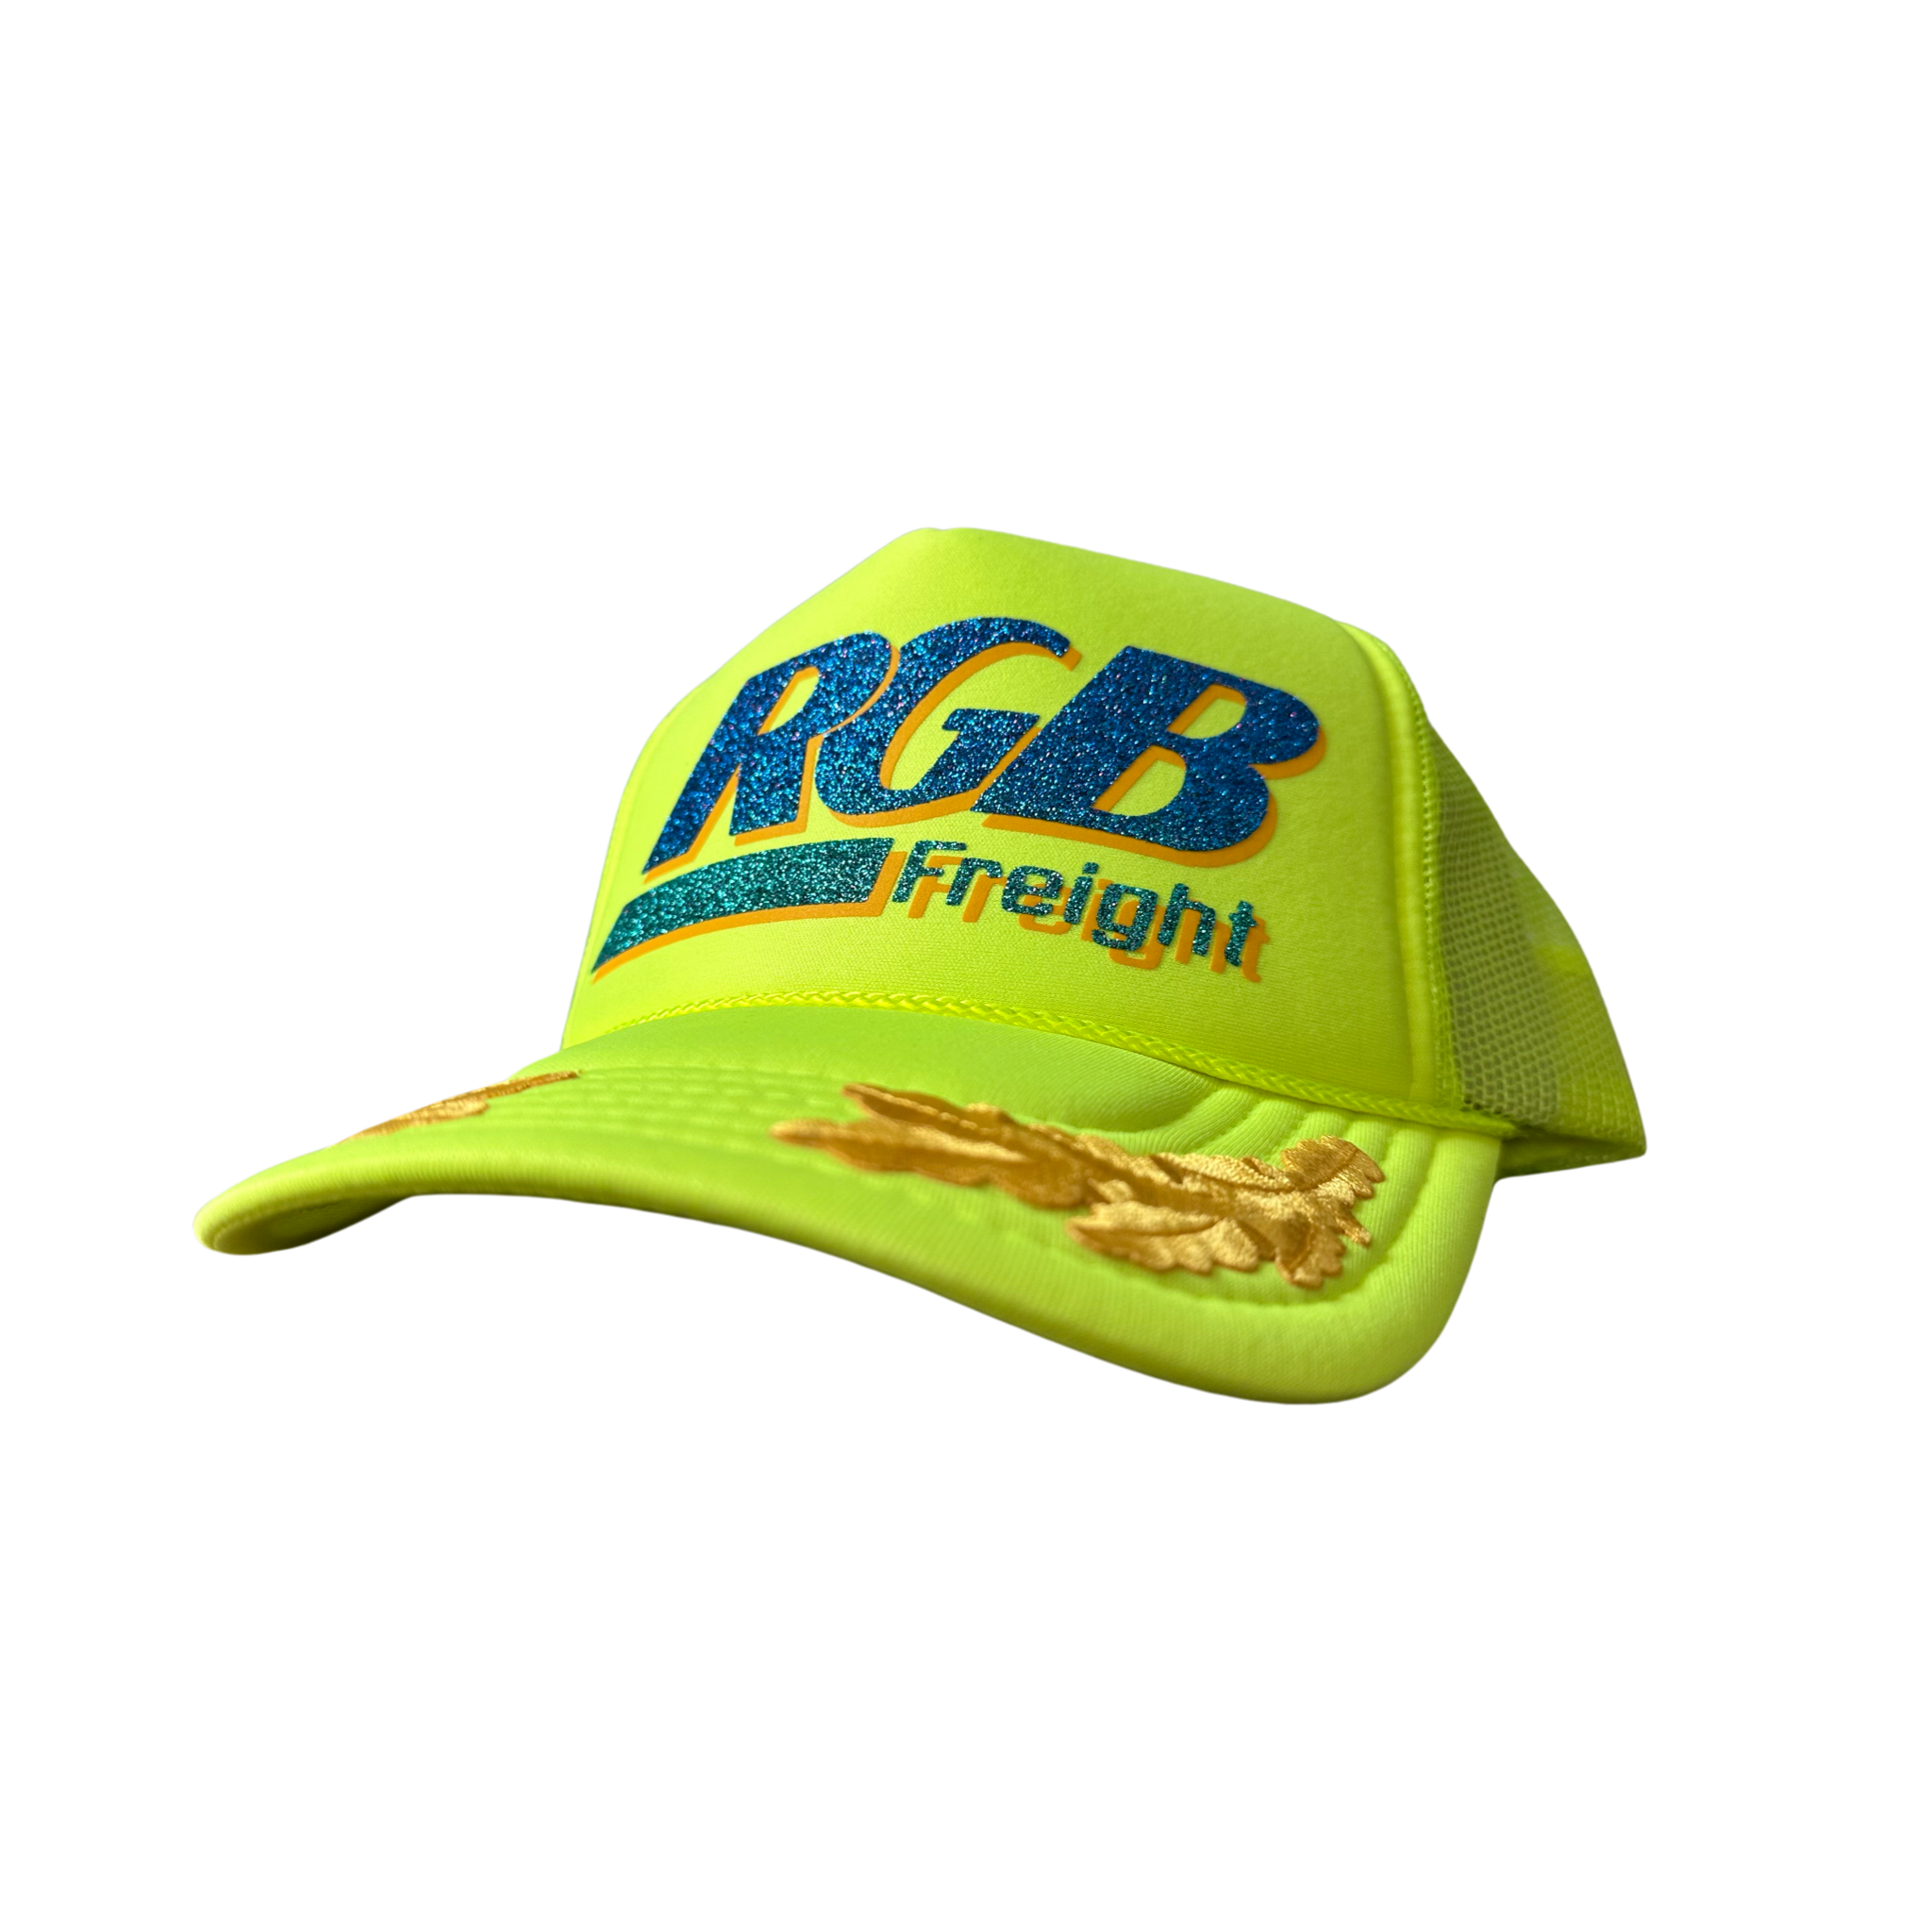 RGB FREIGHT TRUCKER HAT -  1 of 1 REFLECTIVE YELLOW